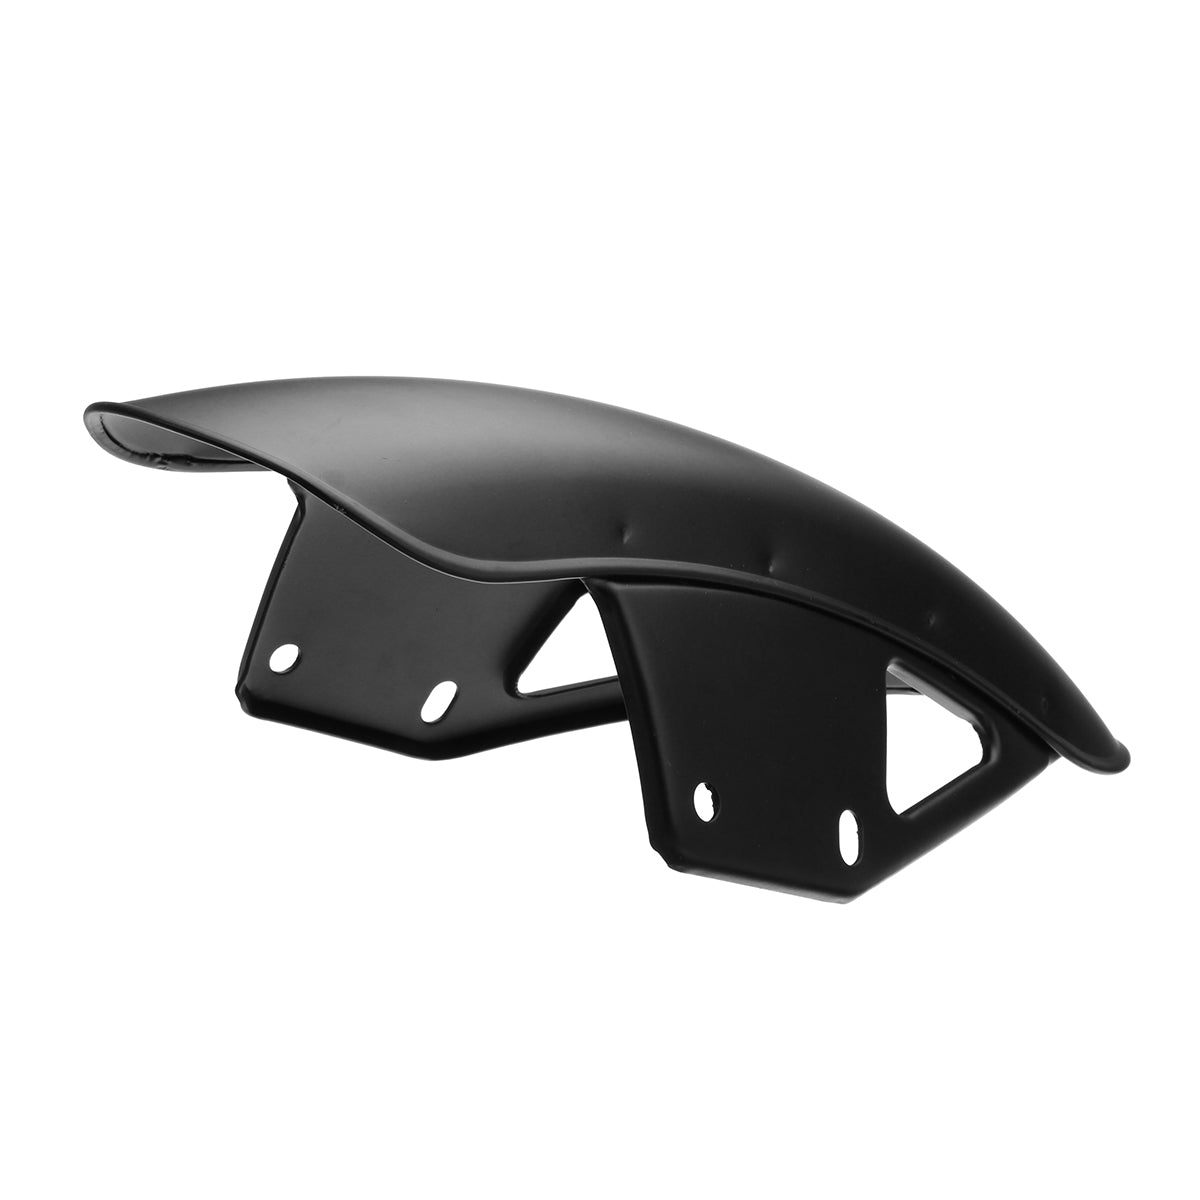 Black Motorcycle Front-Fender Mudguard Fairing Cover For Suzuki GN125 GN250